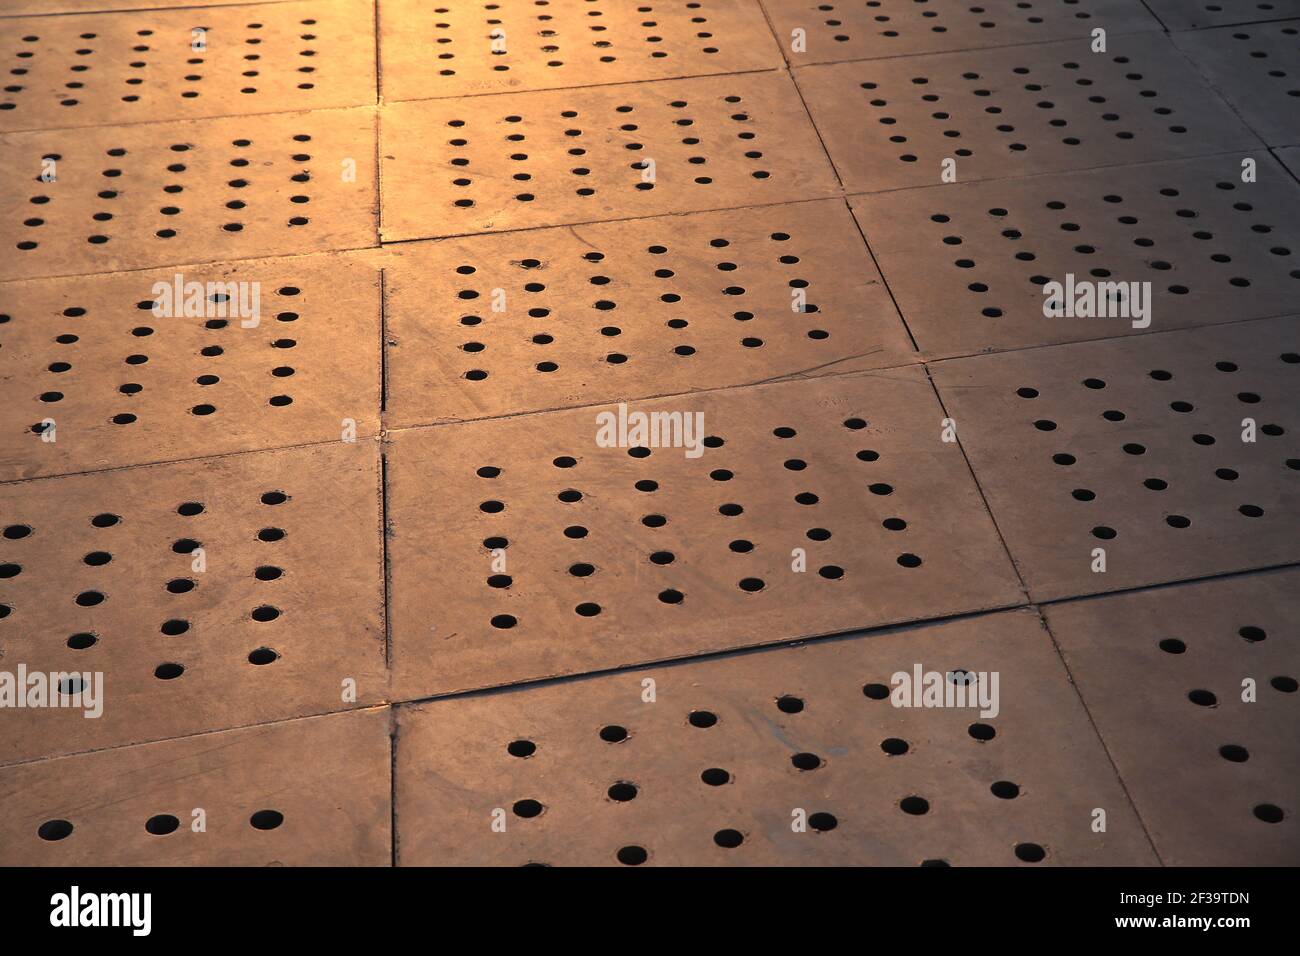 Concrete paving tiles with regular holes under tungsten light. Background image. Stock Photo